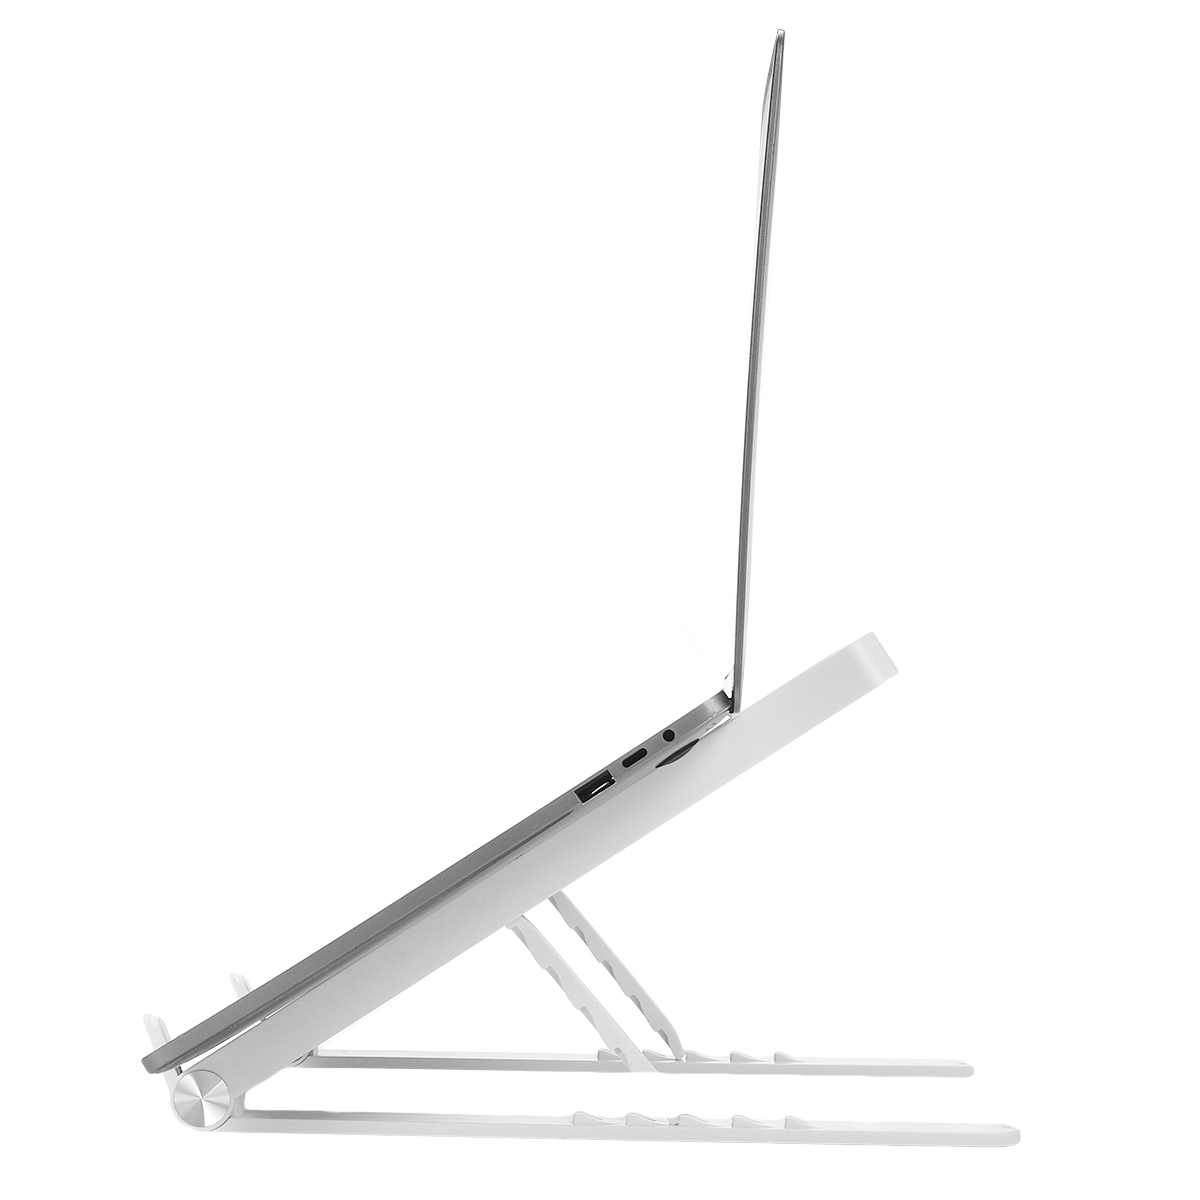 Foldable-5-Height-Adjustable-Laptop-Stand-Tablet-Stand-Heat-Dissipation-for-iPad-Macbook-below-17-in-1700967-8